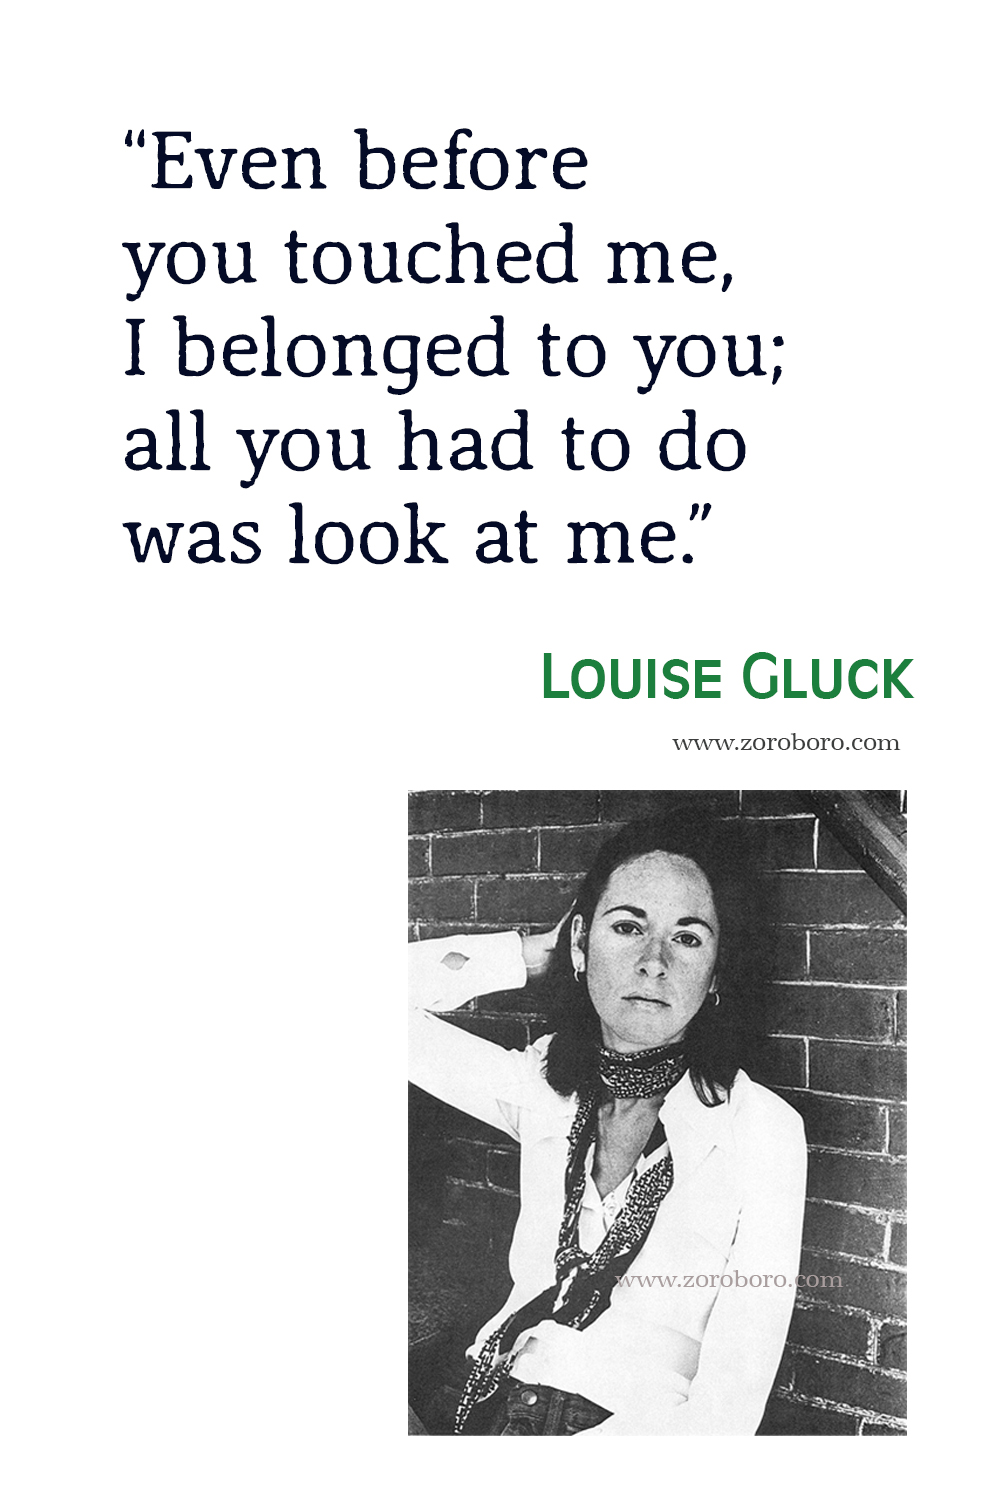 Louise Glück Quotes, Louise Gluck Poems, Louise Gluck Poetry, Louise Gluck Books Quotes, Louise Gluck Averno Quotes. Louise Glück Poems Online.